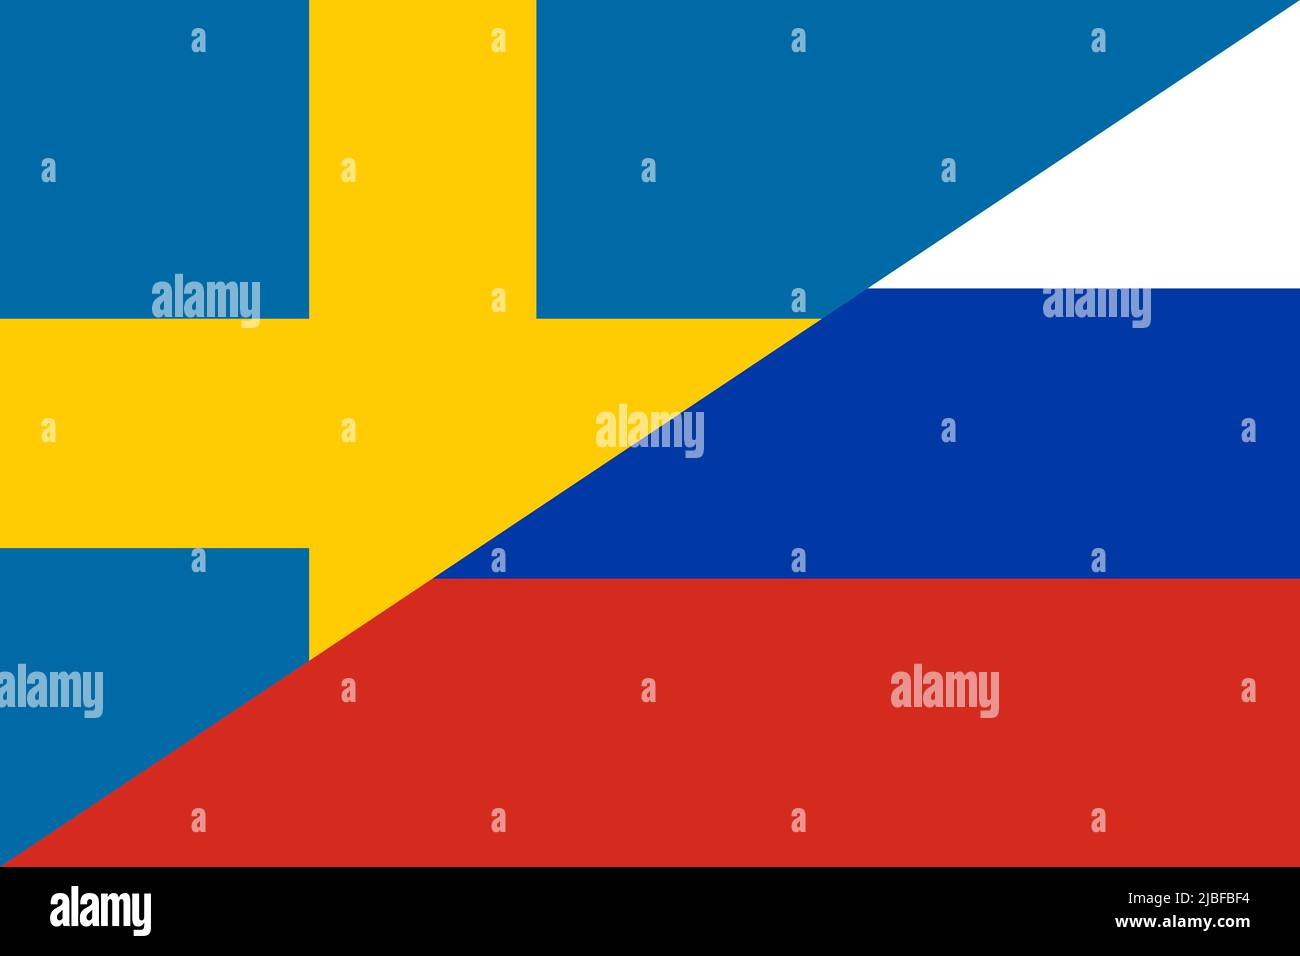 Conflict between Russia and Sweden war concept. Russian and Swedish flag background. Stock Photo